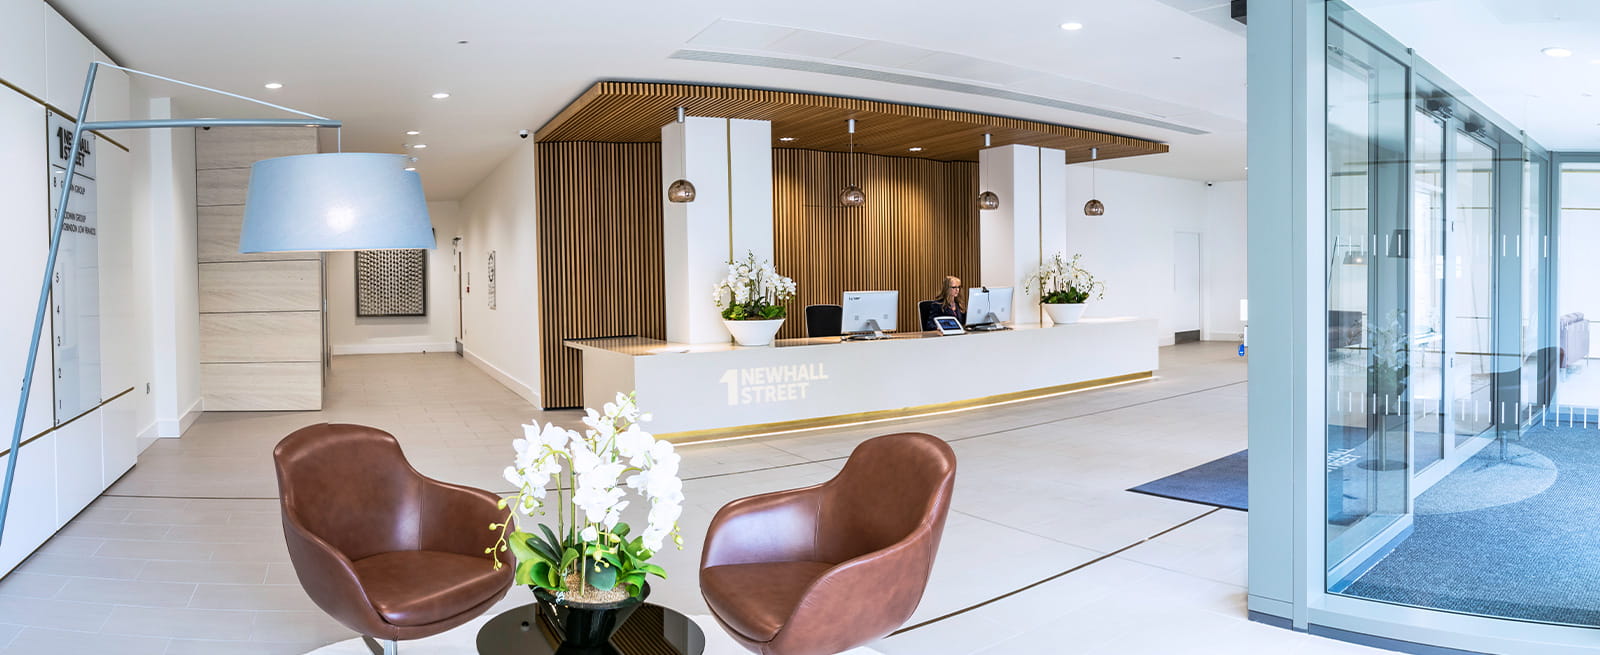 1 Newhall Street Reception.